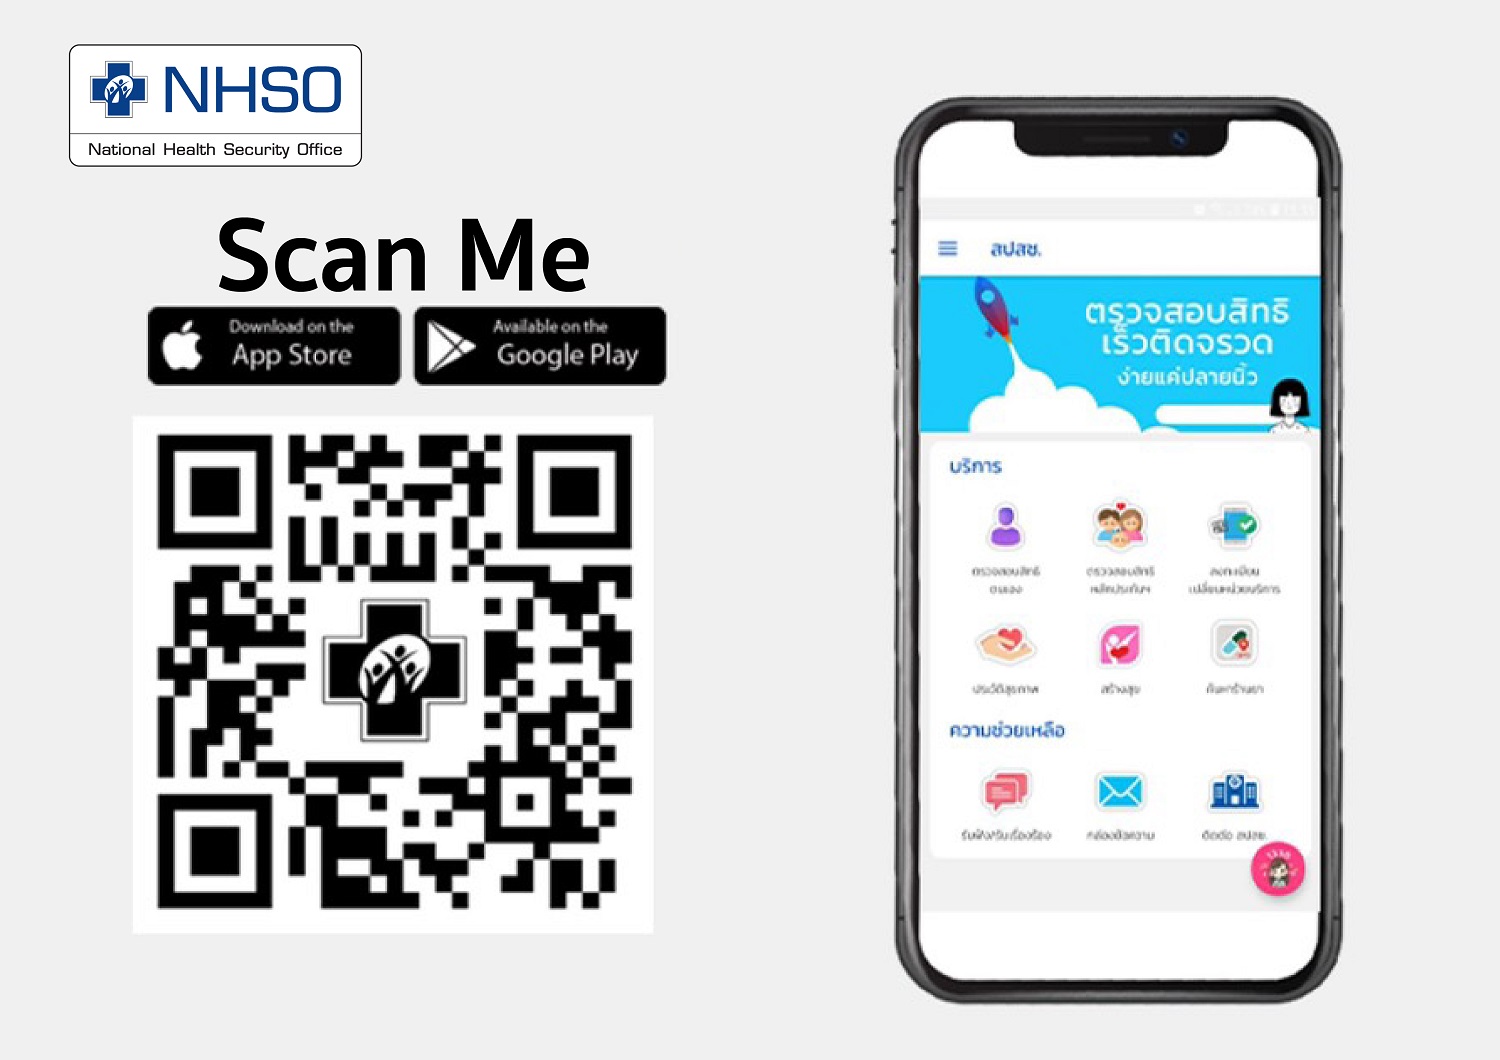 NHSO mobile application launched for the UCS registration